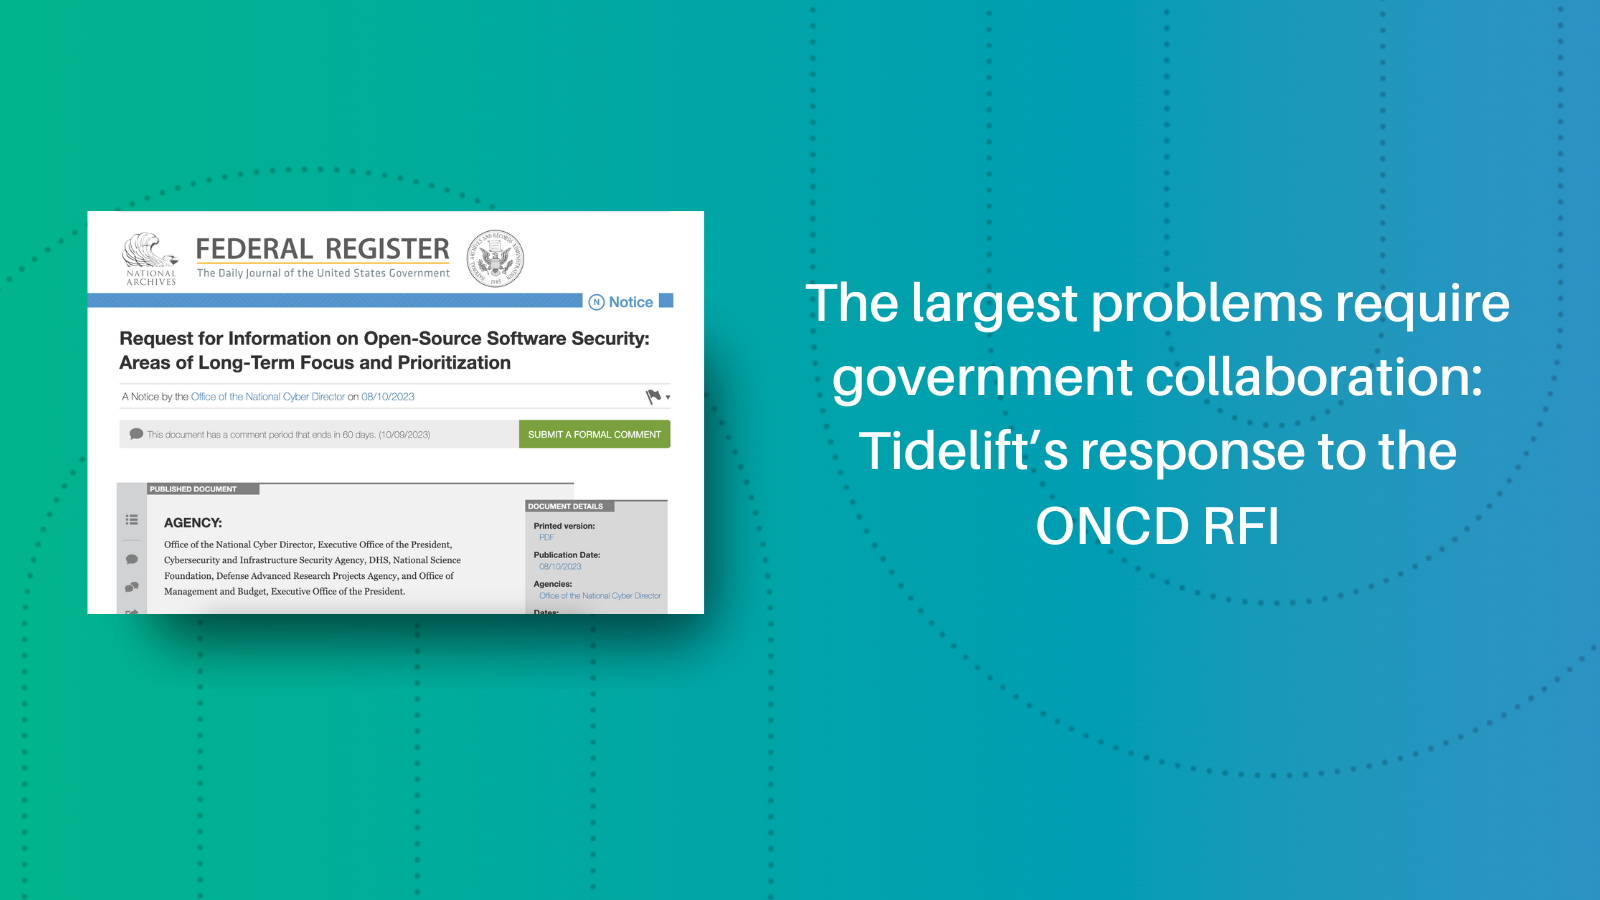 The largest problems require government collaboration: Tidelift’s response to the ONCD RFI